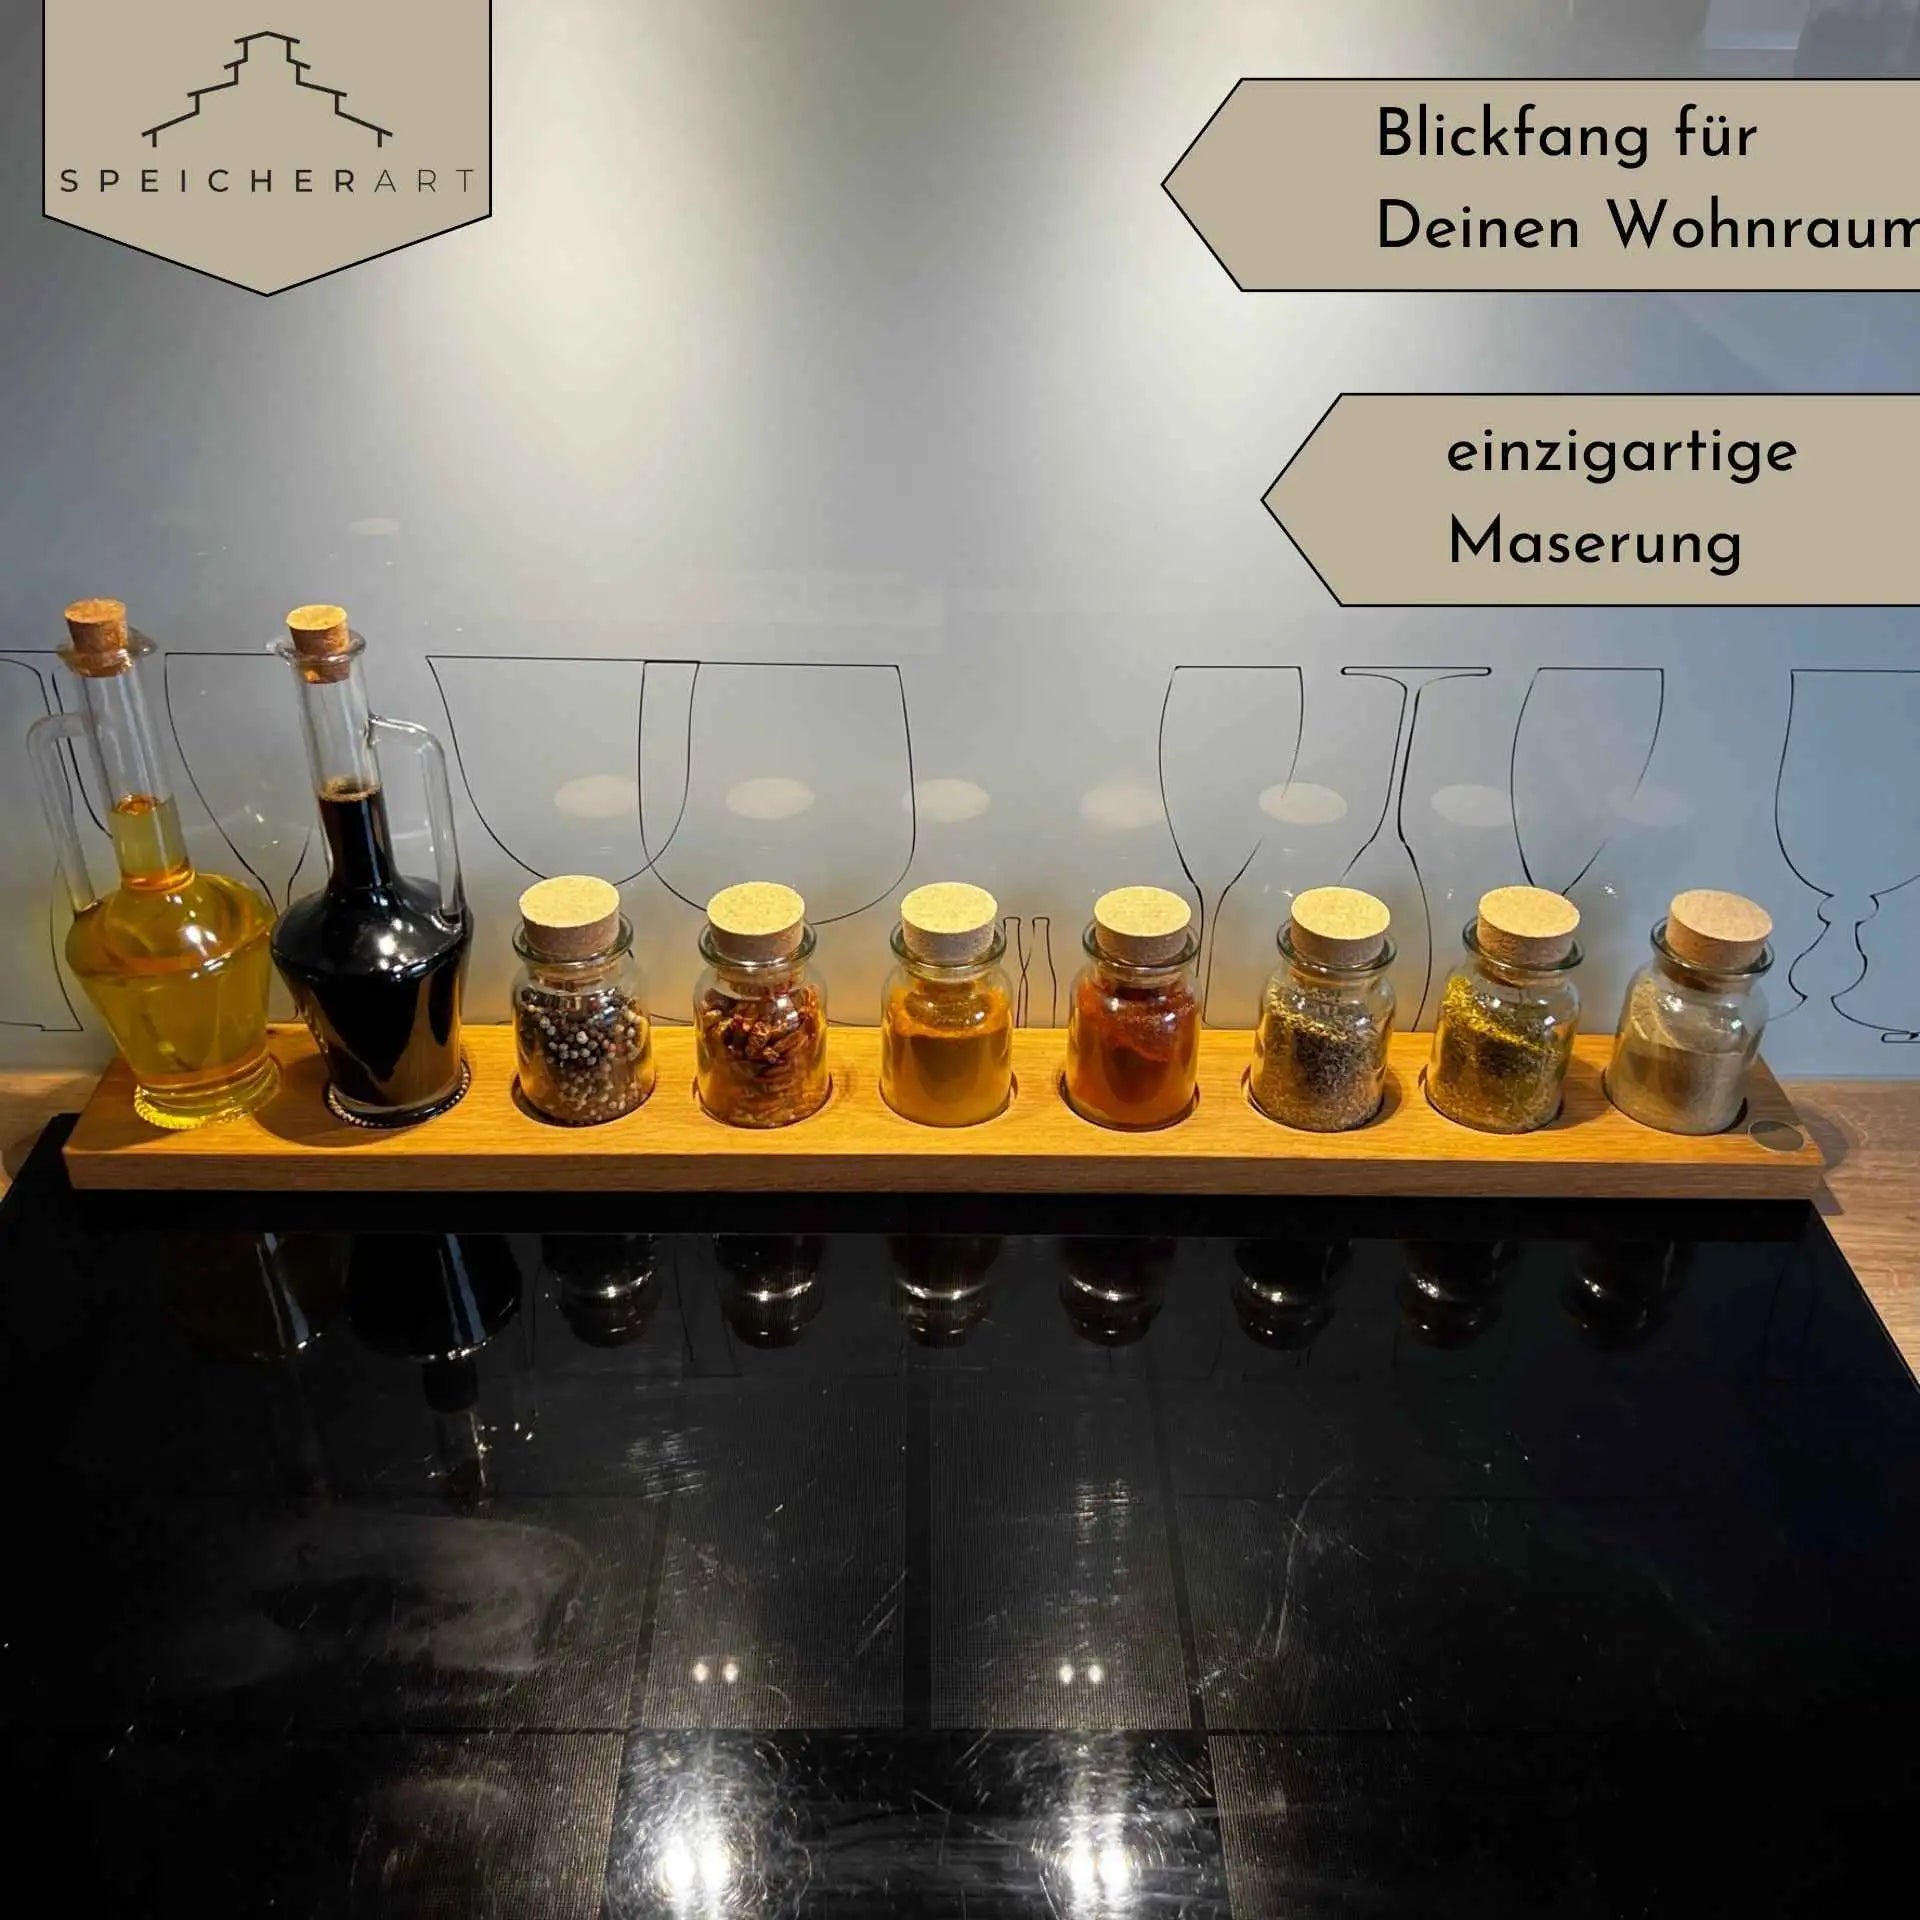 Standing spice rack, table decoration for vinegar, oils and spices - Ava